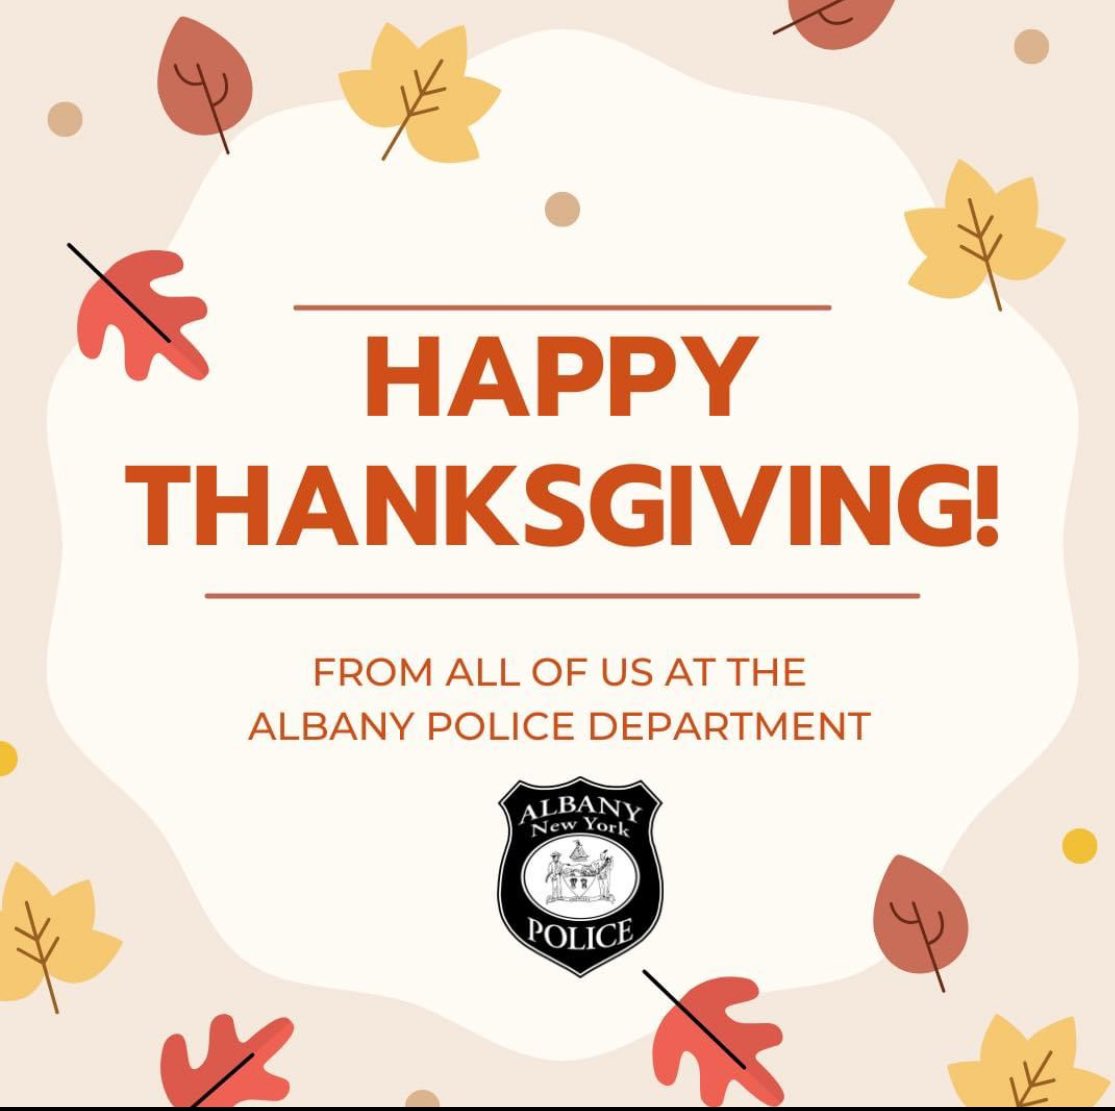 Today, The Albany Police Department would like to express our gratitude for the amazing community we serve and protect. We wish you a peaceful and joyful Thanksgiving!